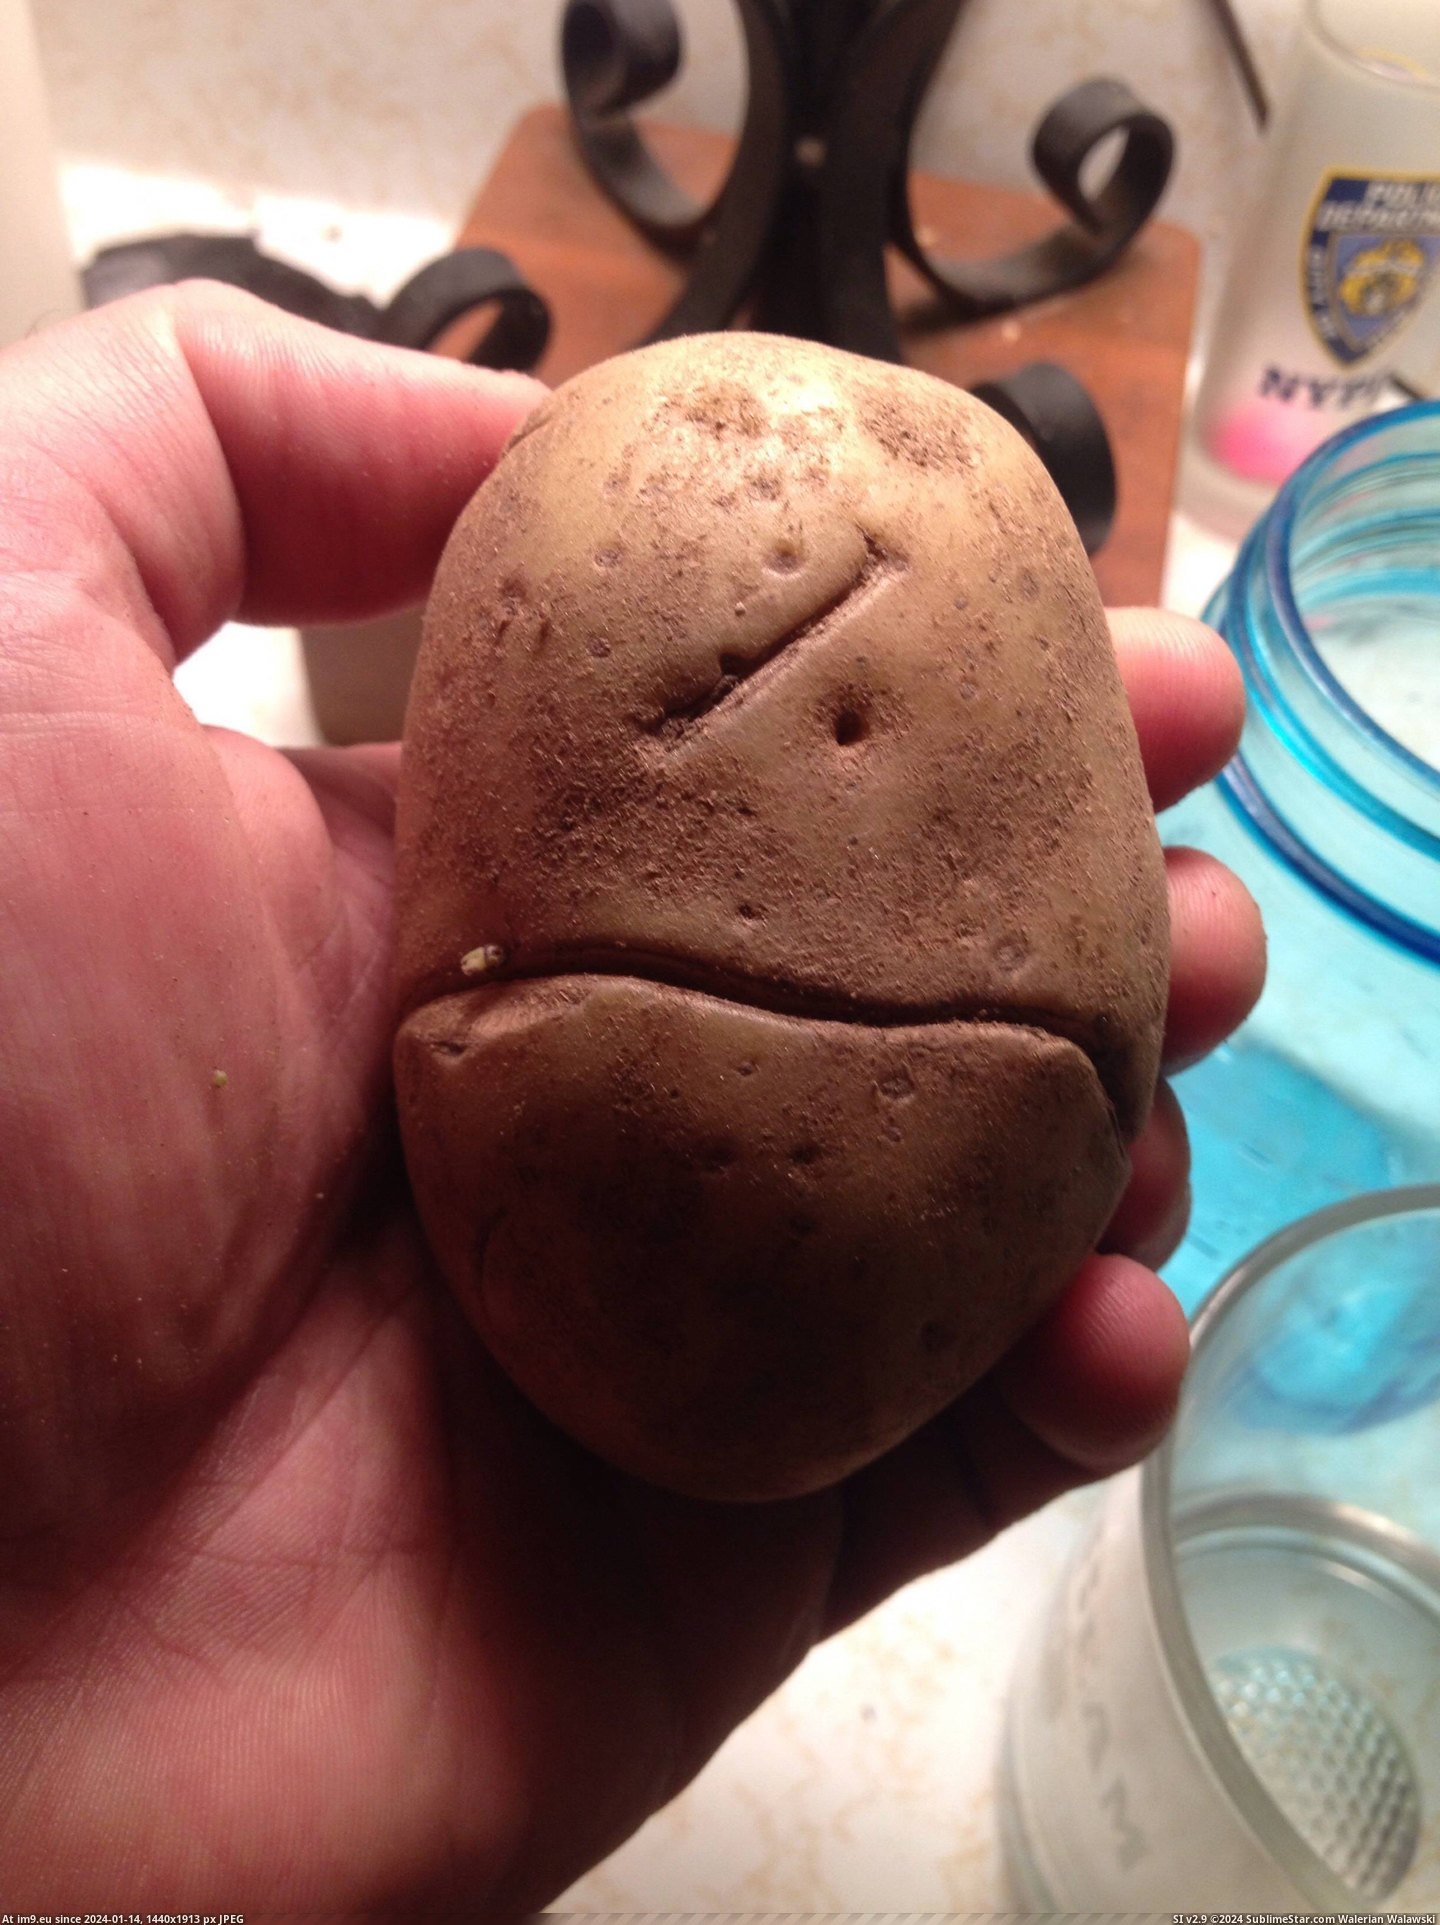 #One #Park #Potato #Eyed #South #Canadian [Mildlyinteresting] This potato looks like a one-eyed Canadian from South Park. Pic. (Изображение из альбом My r/MILDLYINTERESTING favs))